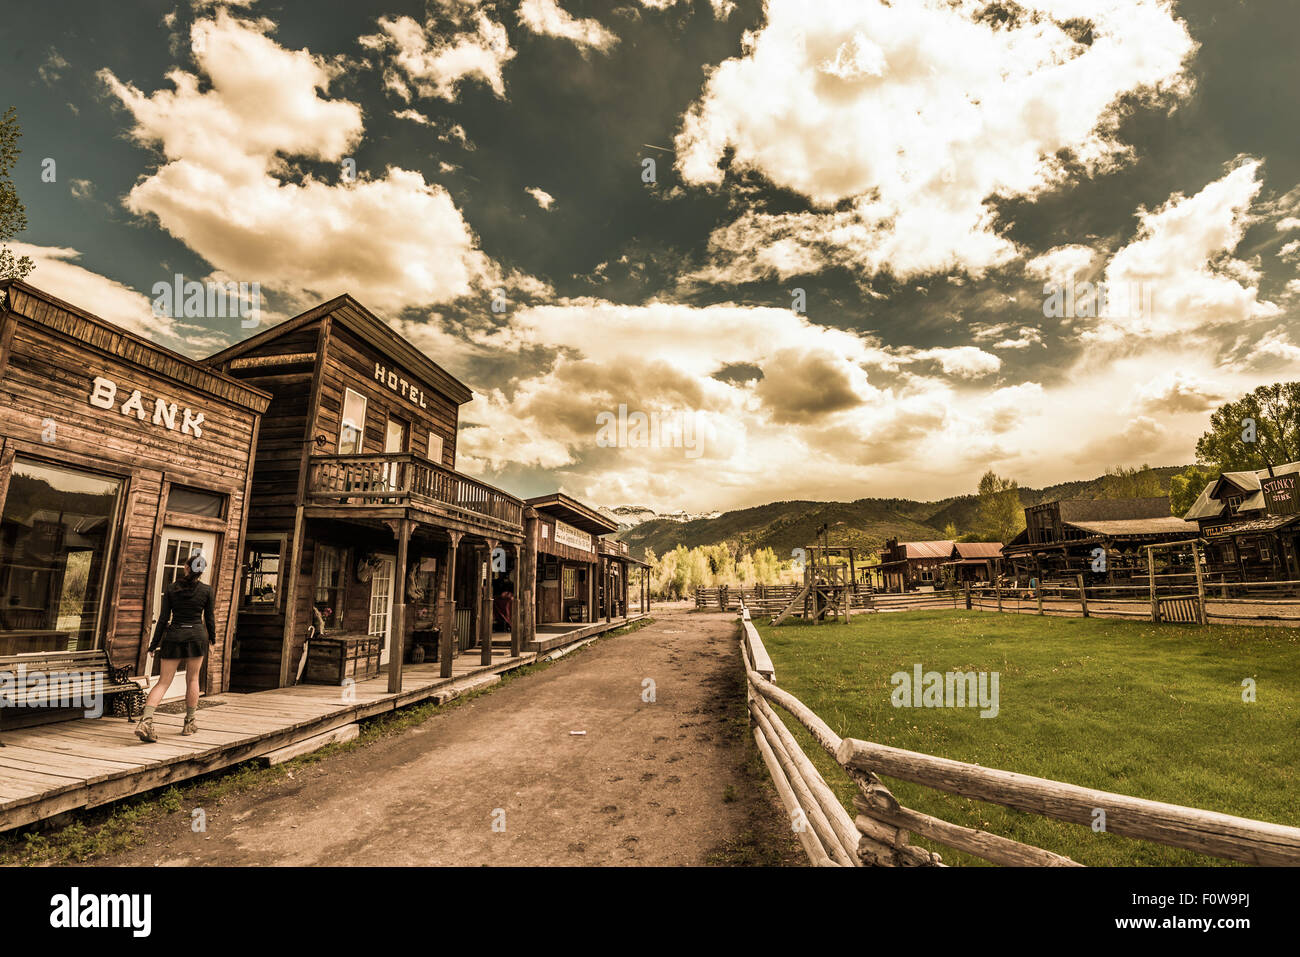 Hag's Ranch Legends of the West Rodeo Ridgway Colorado Stock Photo